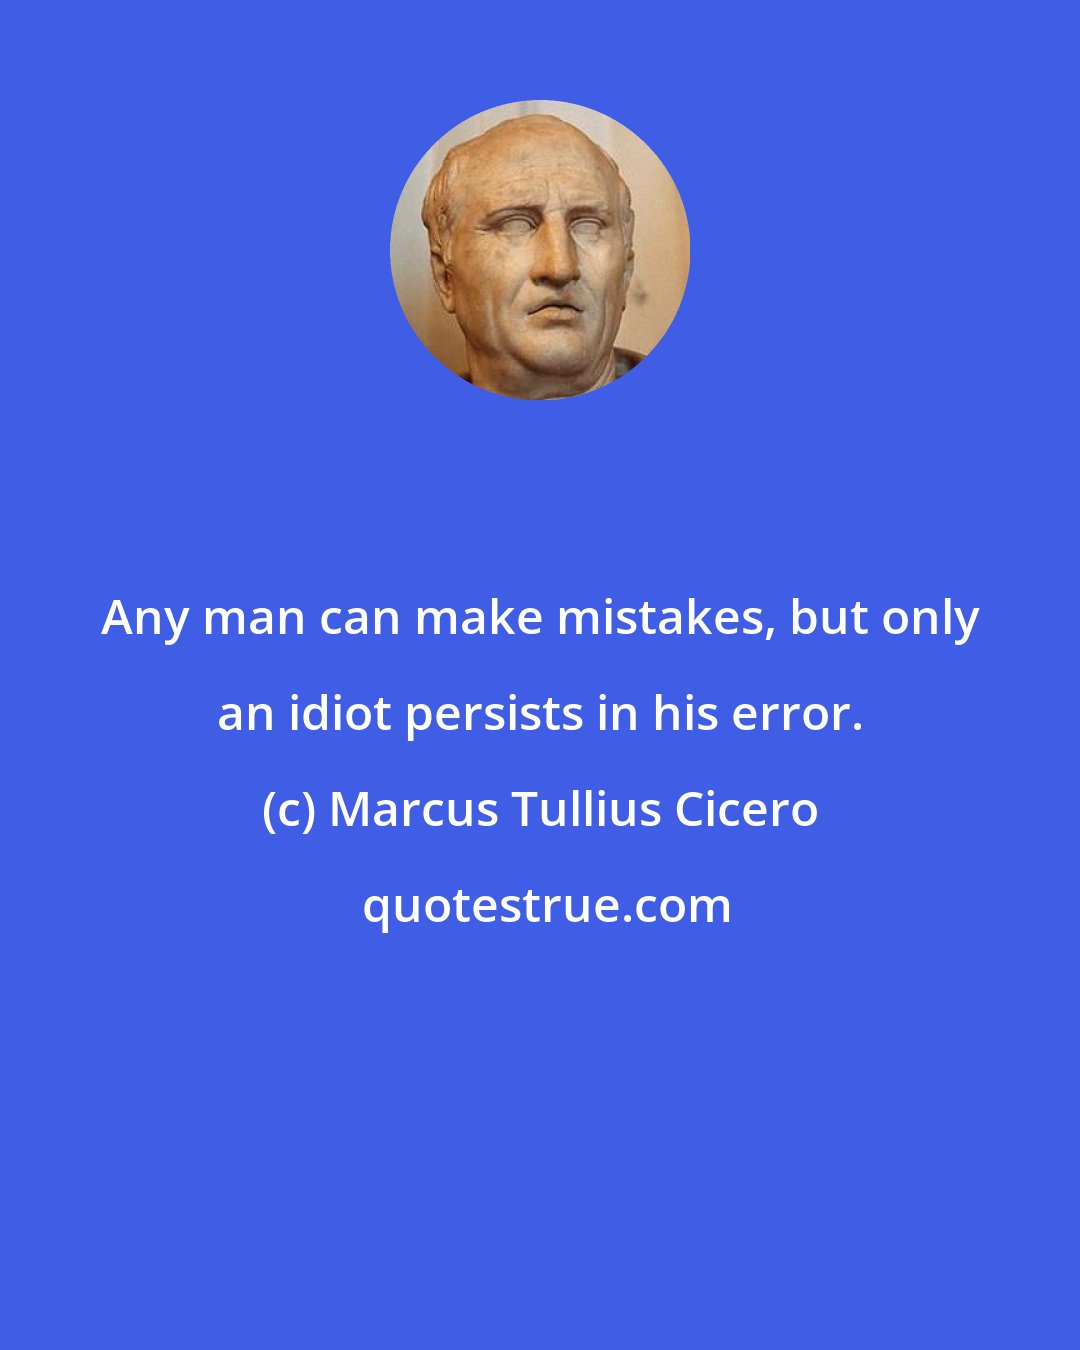 Marcus Tullius Cicero: Any man can make mistakes, but only an idiot persists in his error.